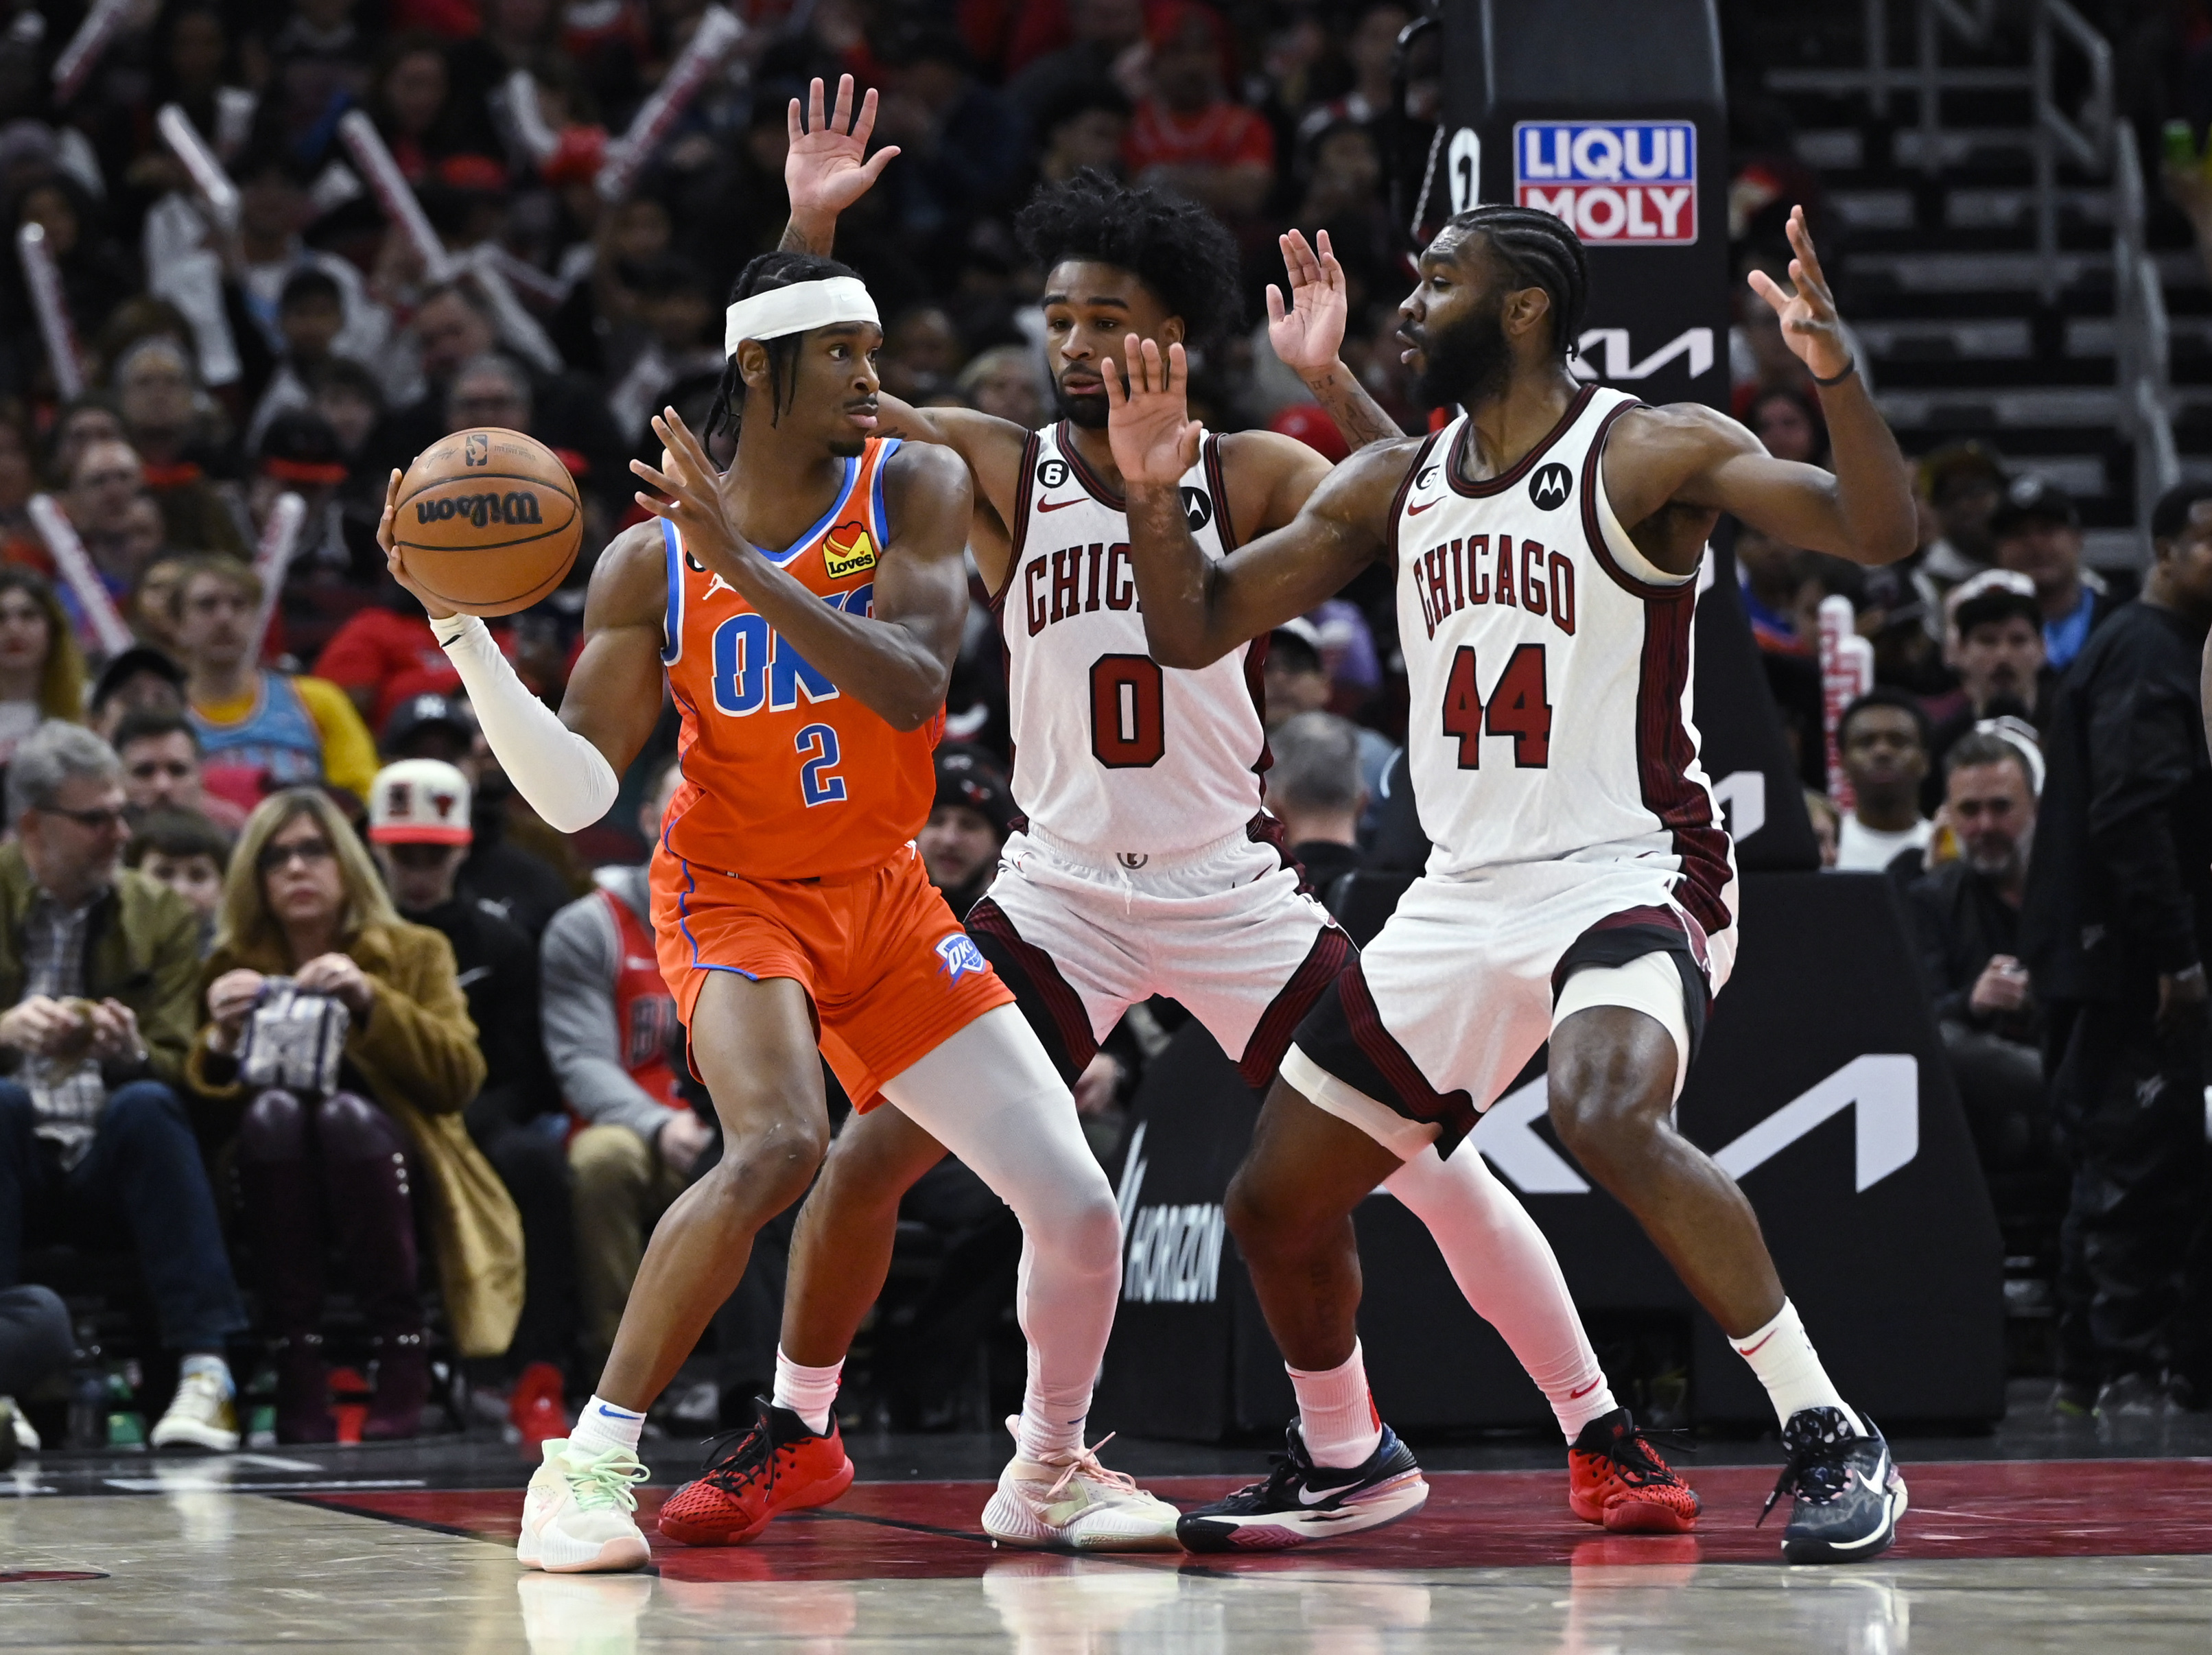 Oklahoma City Thunder's Shai Gilgeous-Alexander (2) passes the ball away from Chicago Bulls' Coby White (0) and Patrick Williams (44) during the second half of an NBA basketball game, on Friday, January 13, 2023, in Chicago.  (AP Photo/Matt Marton)